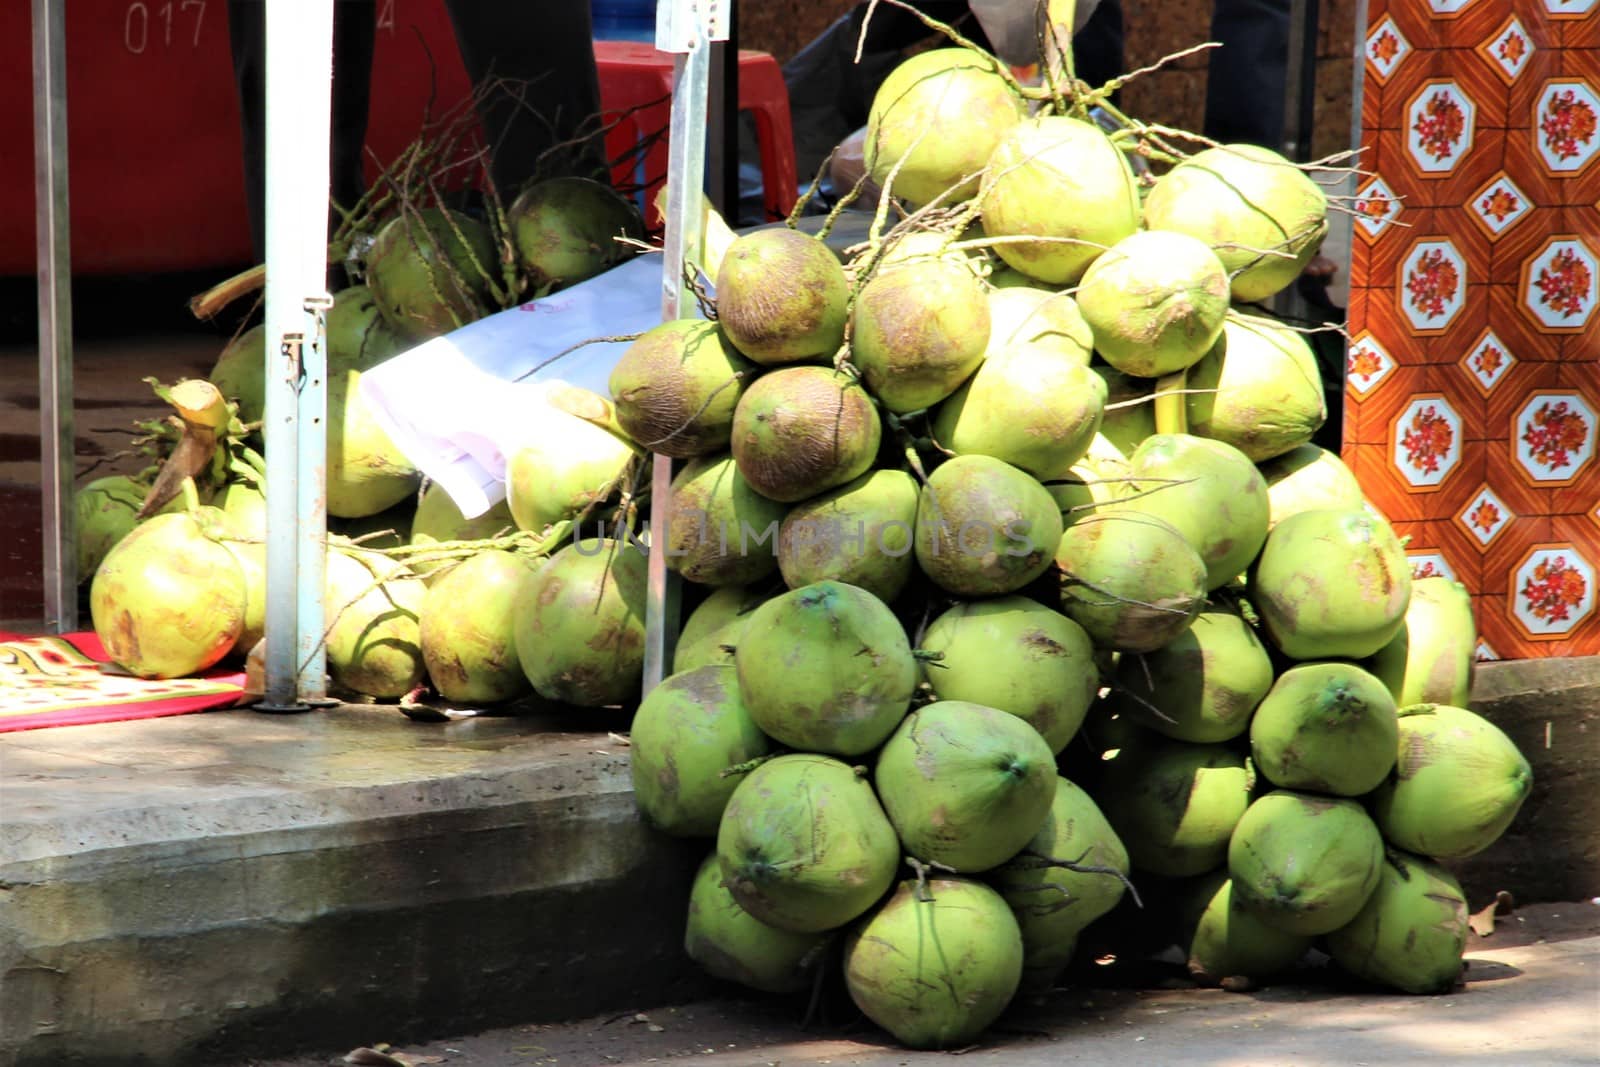 Coconuts in a big pile ready to sell